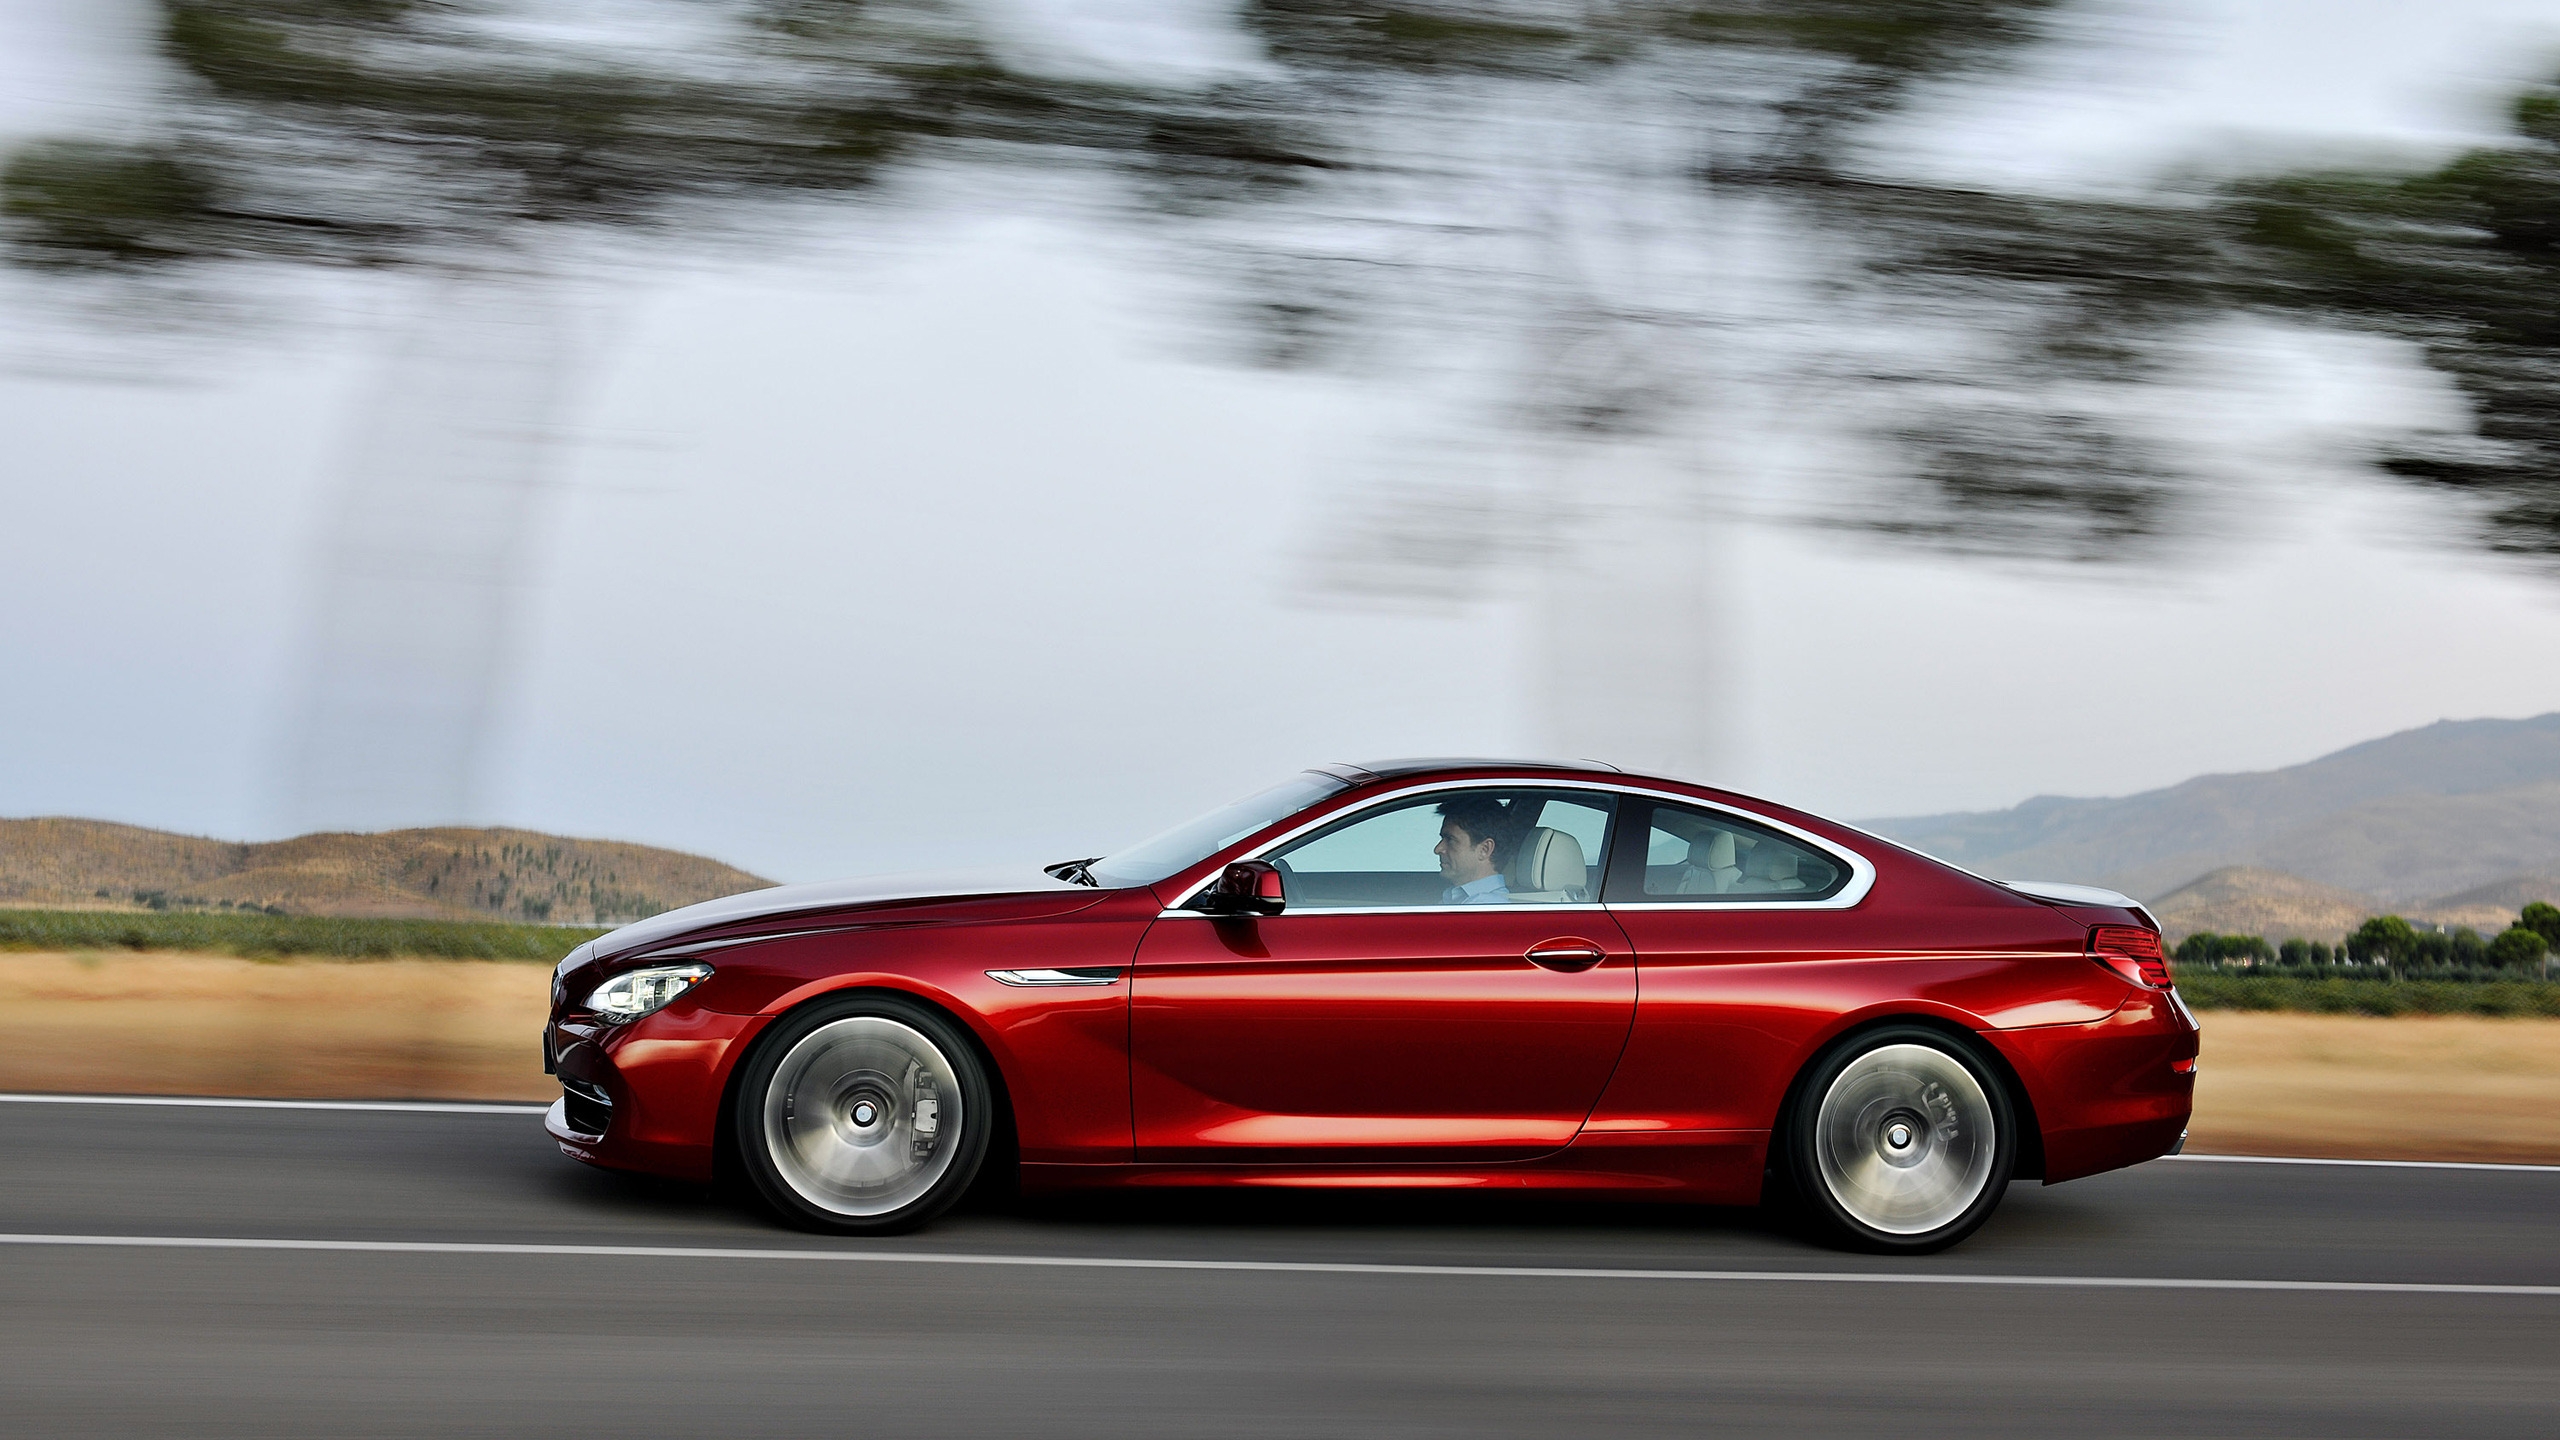 BMW 650i Coupe 2012 for 2560x1440 HDTV resolution